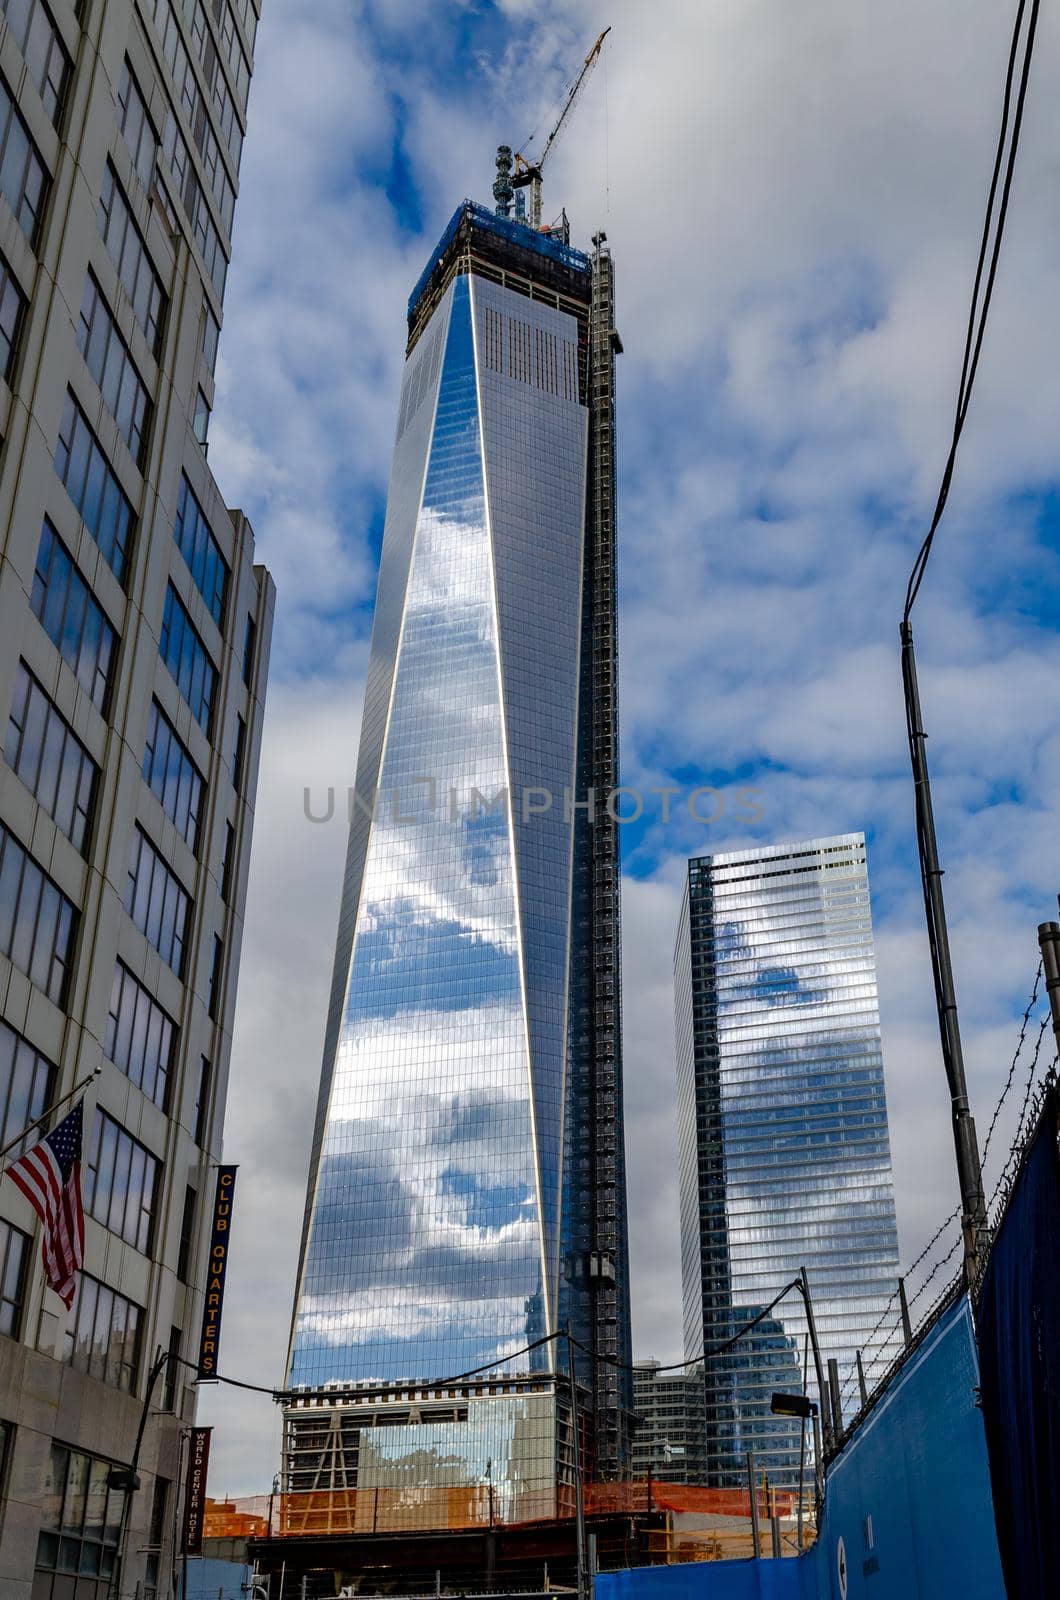 One World Trade Center construction area with  clouds reflection in the window, crane on top during daytime with overcast, New York City, view from low angle, vertical